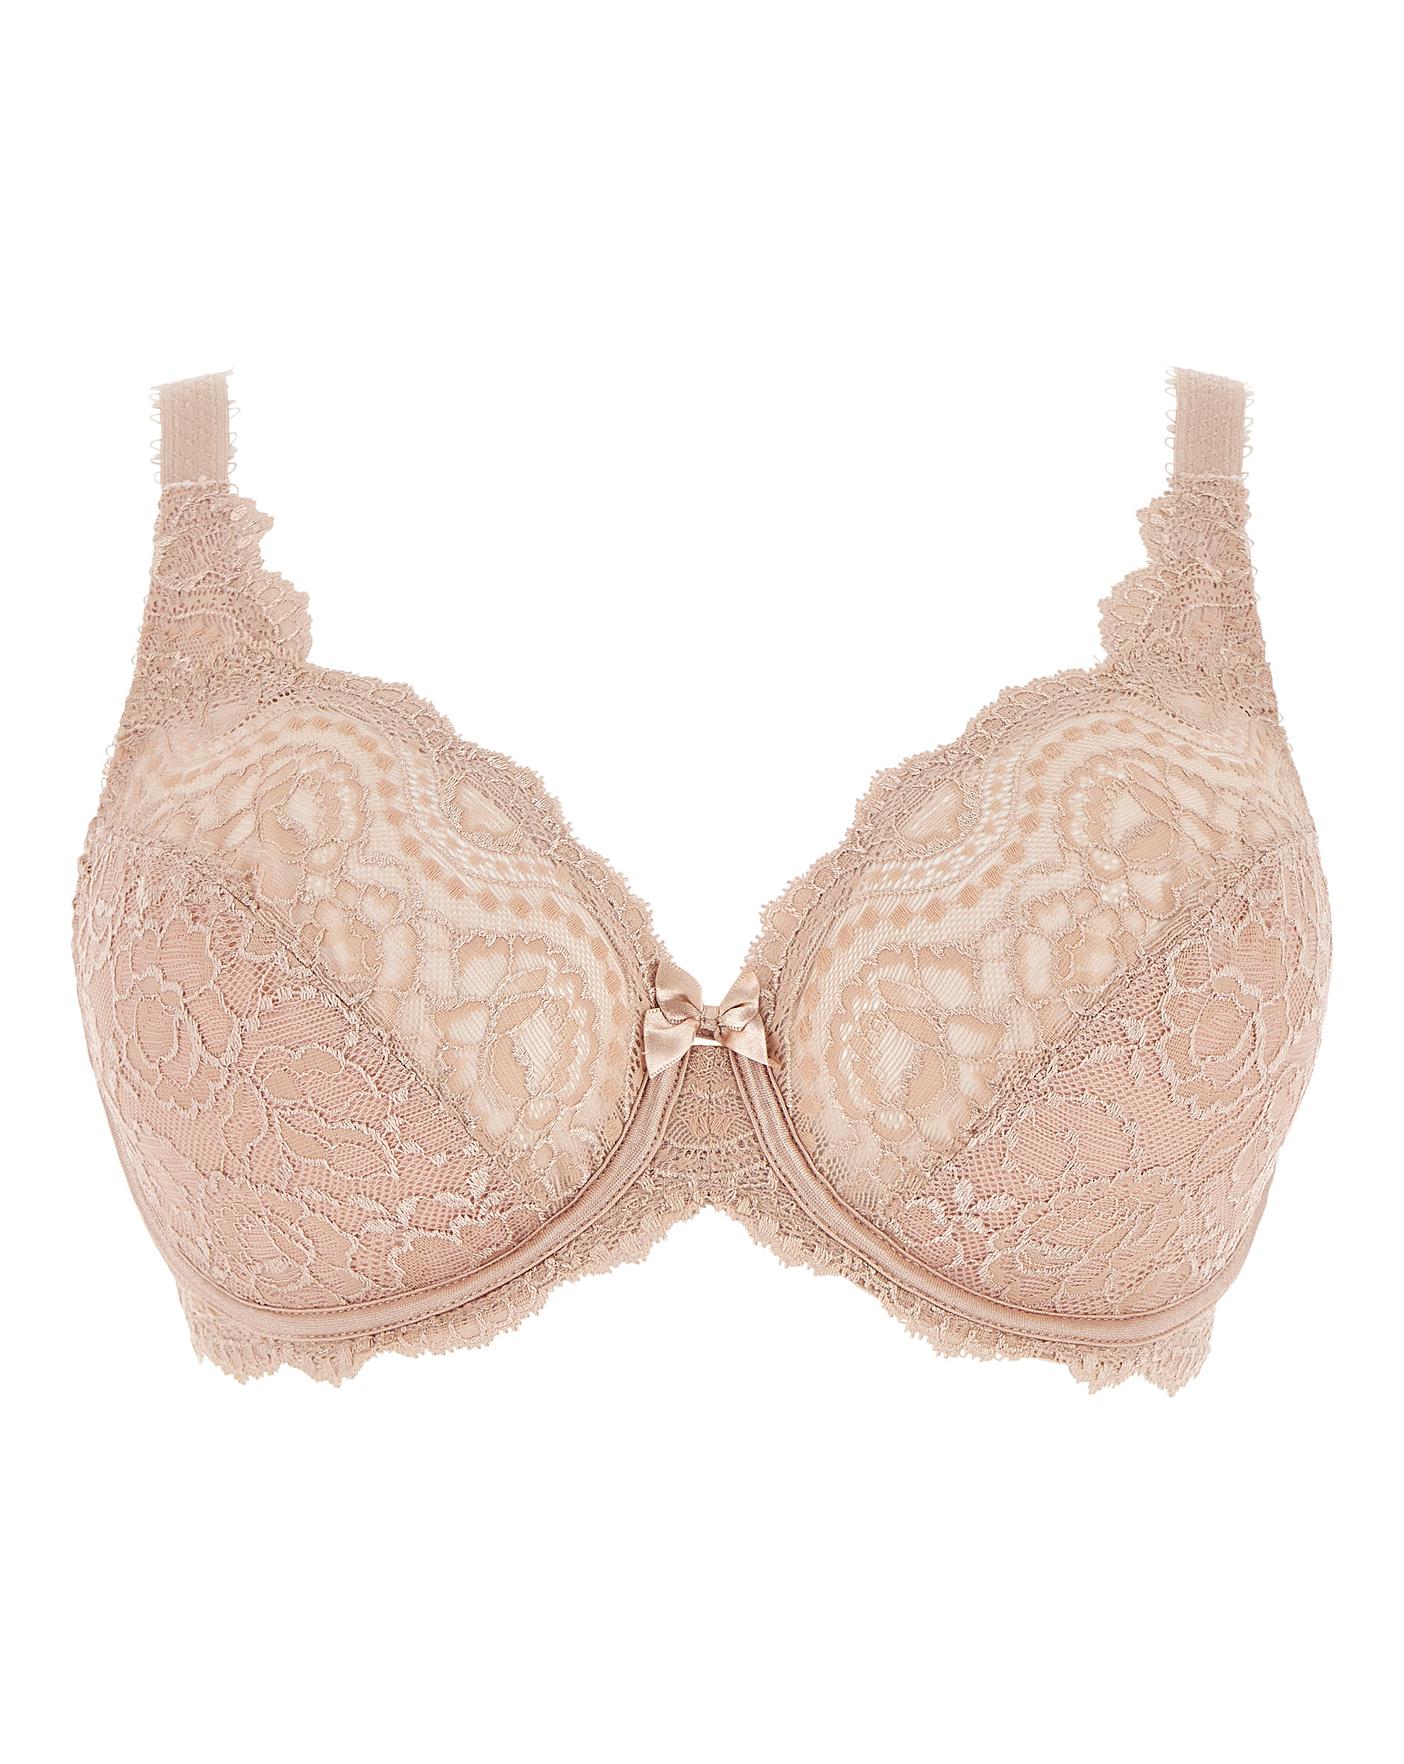 Playtex Flower Lace Full Cup Bra Nude Simply Be